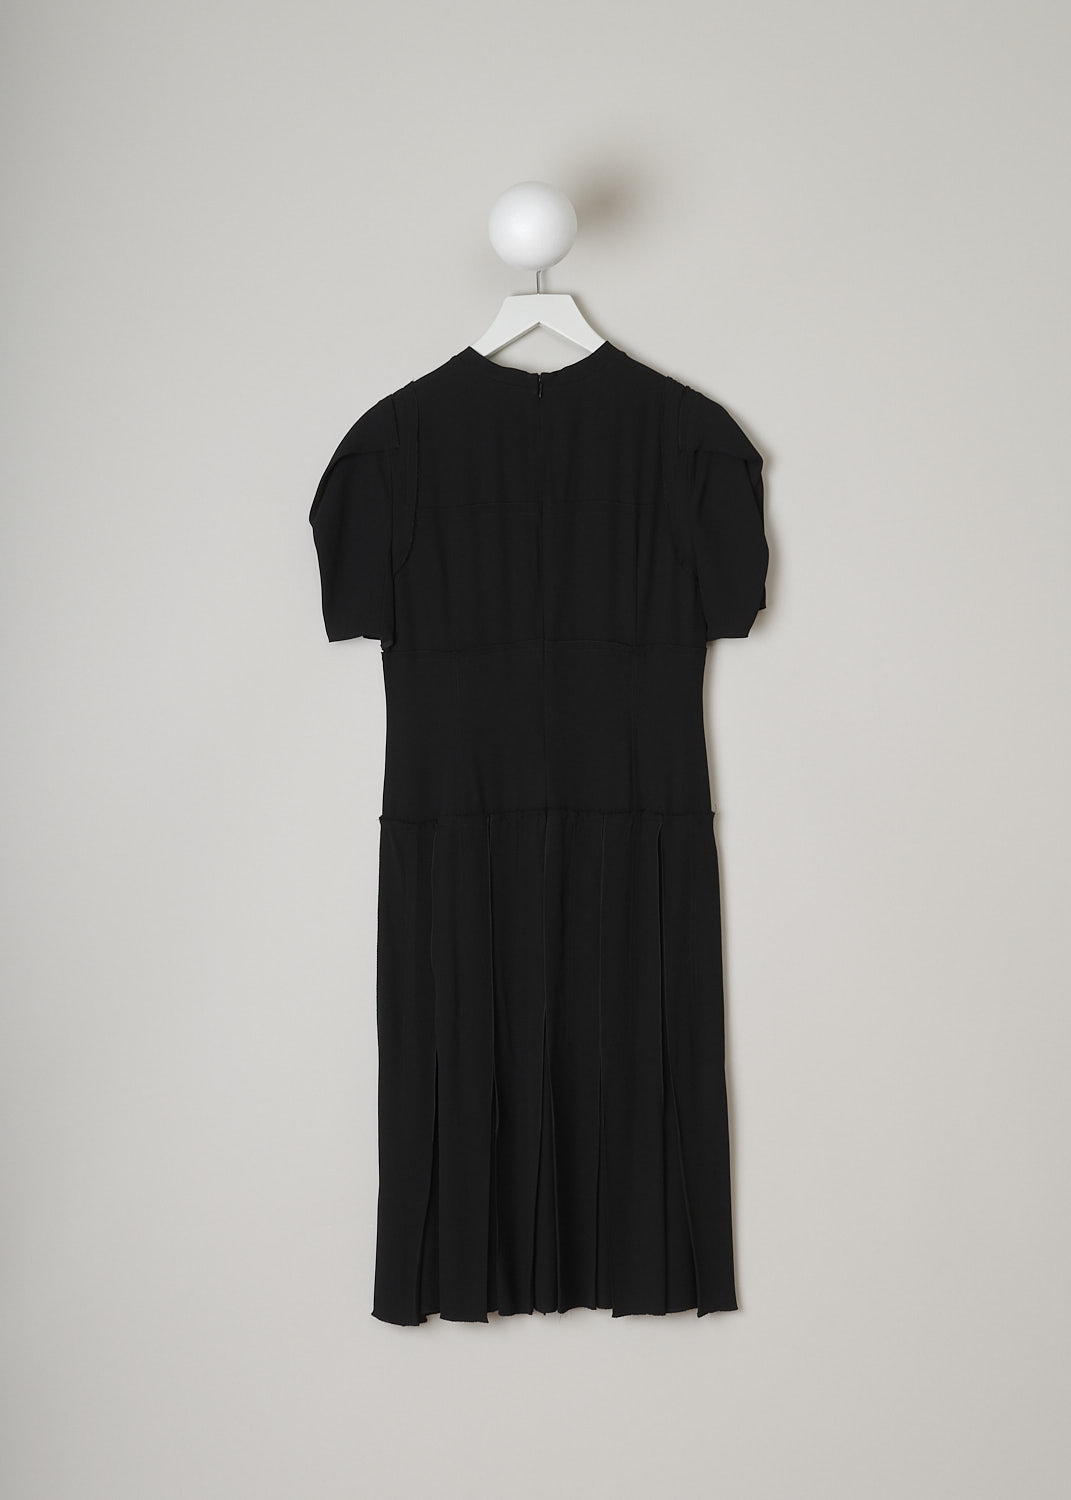 MARNI, BLACK DECONSTRUCTED DRESS, ABMA0096FY_TV285_00N99, Black, Back, This black deconstructed dress has a round neckline and short puff sleeves. The dress has a paneled bodice with exposed seams and raw edges and a box pleated skirt. A concealed centre zip in the back functions as the closure option.   
